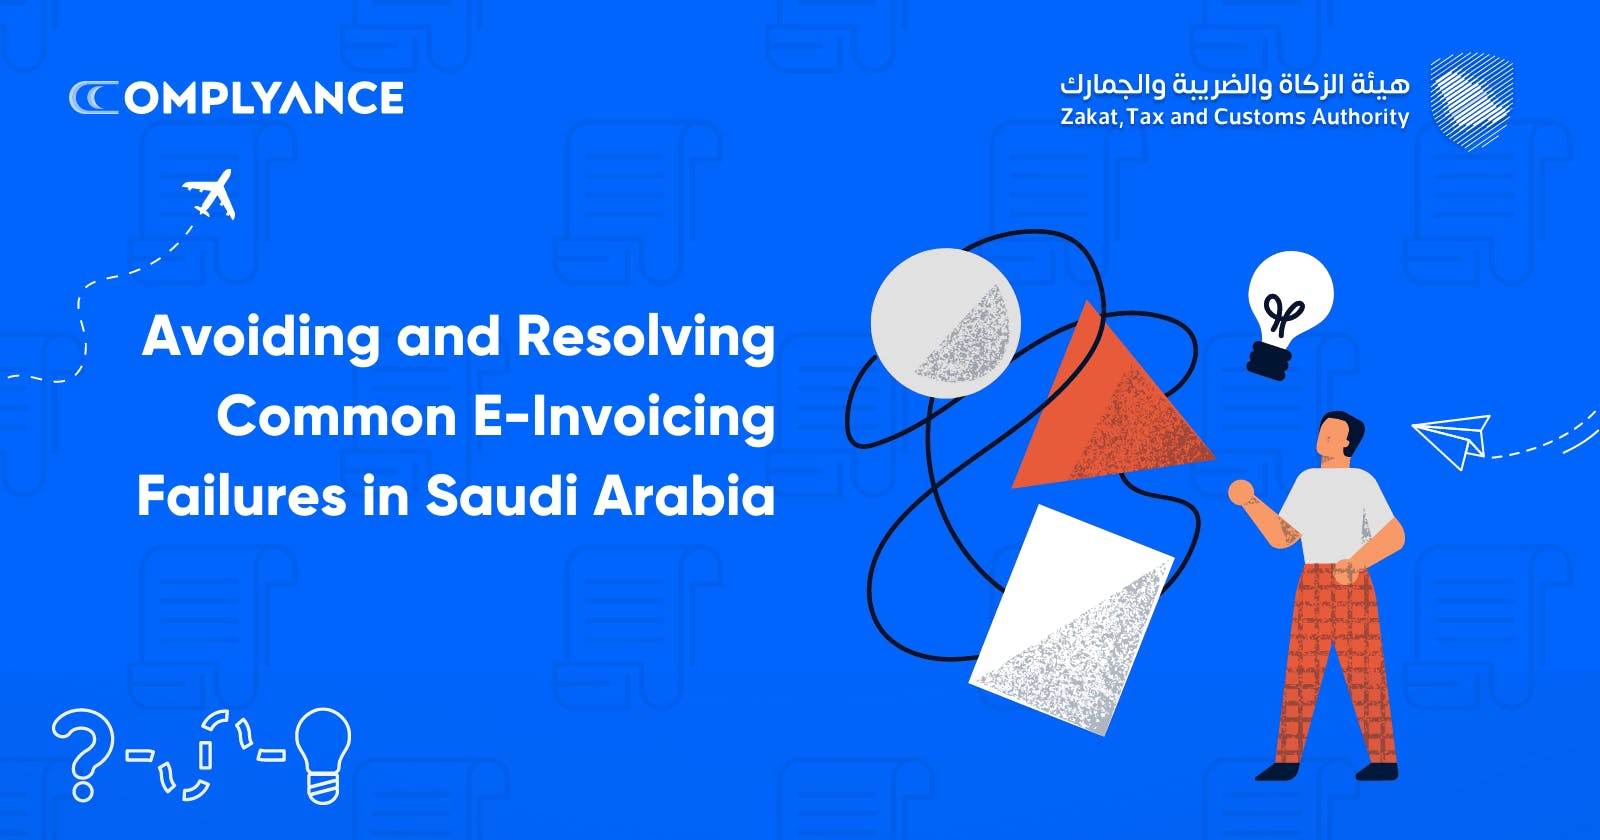 How to Avoid and Resolve Common E-Invoicing Failures in Saudi Arabia?